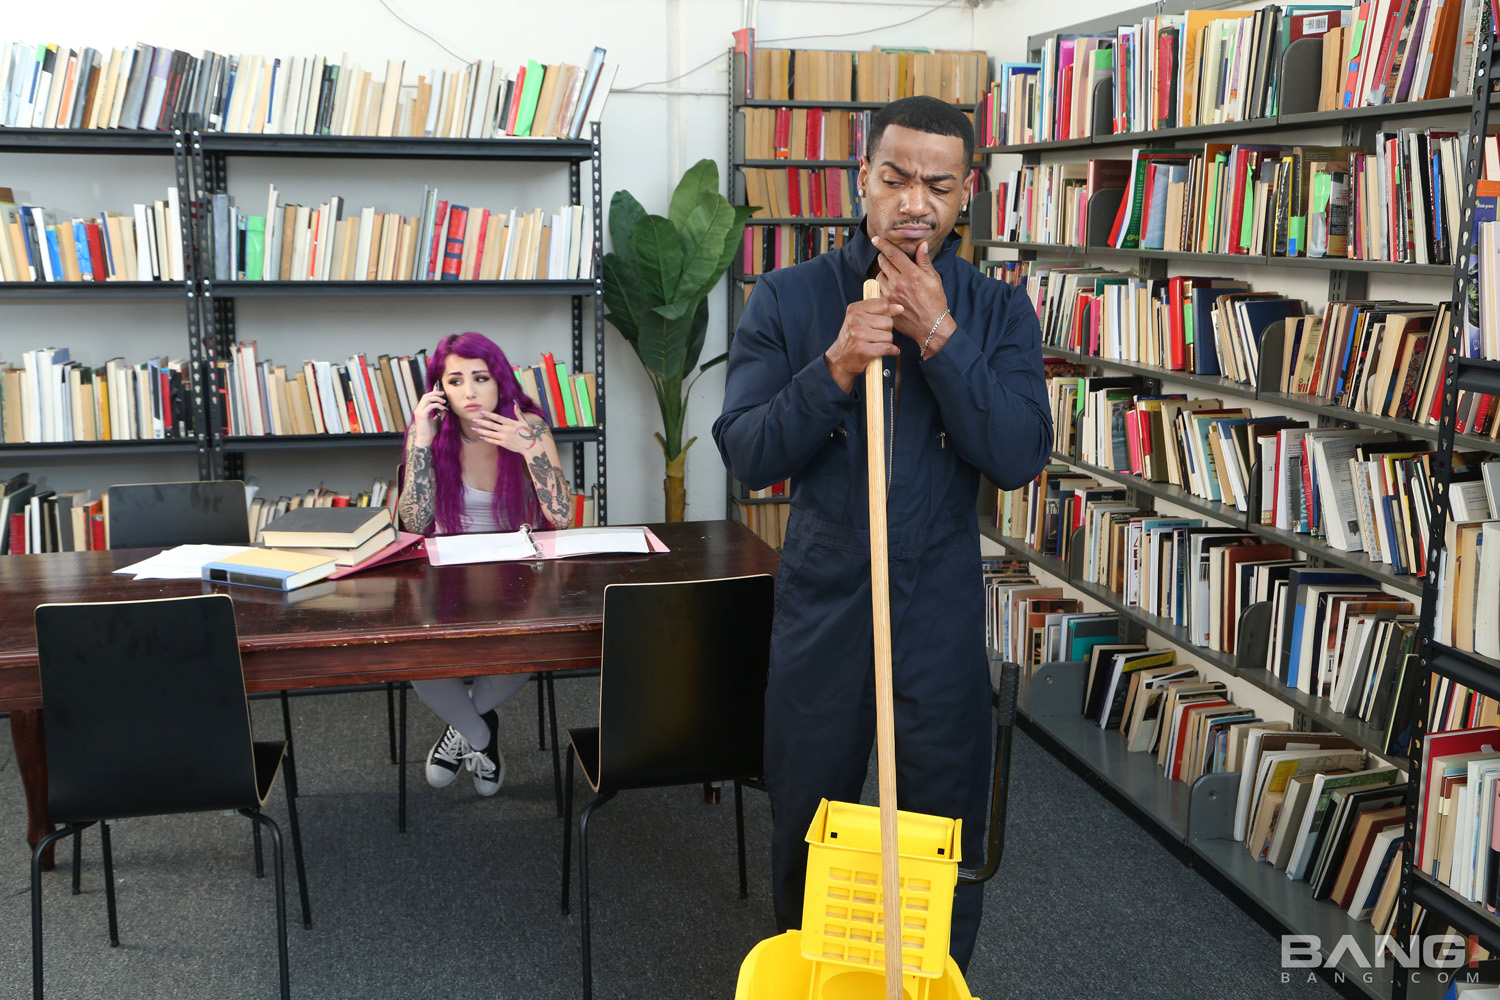 Val Steele bangs the janitor in the library after class